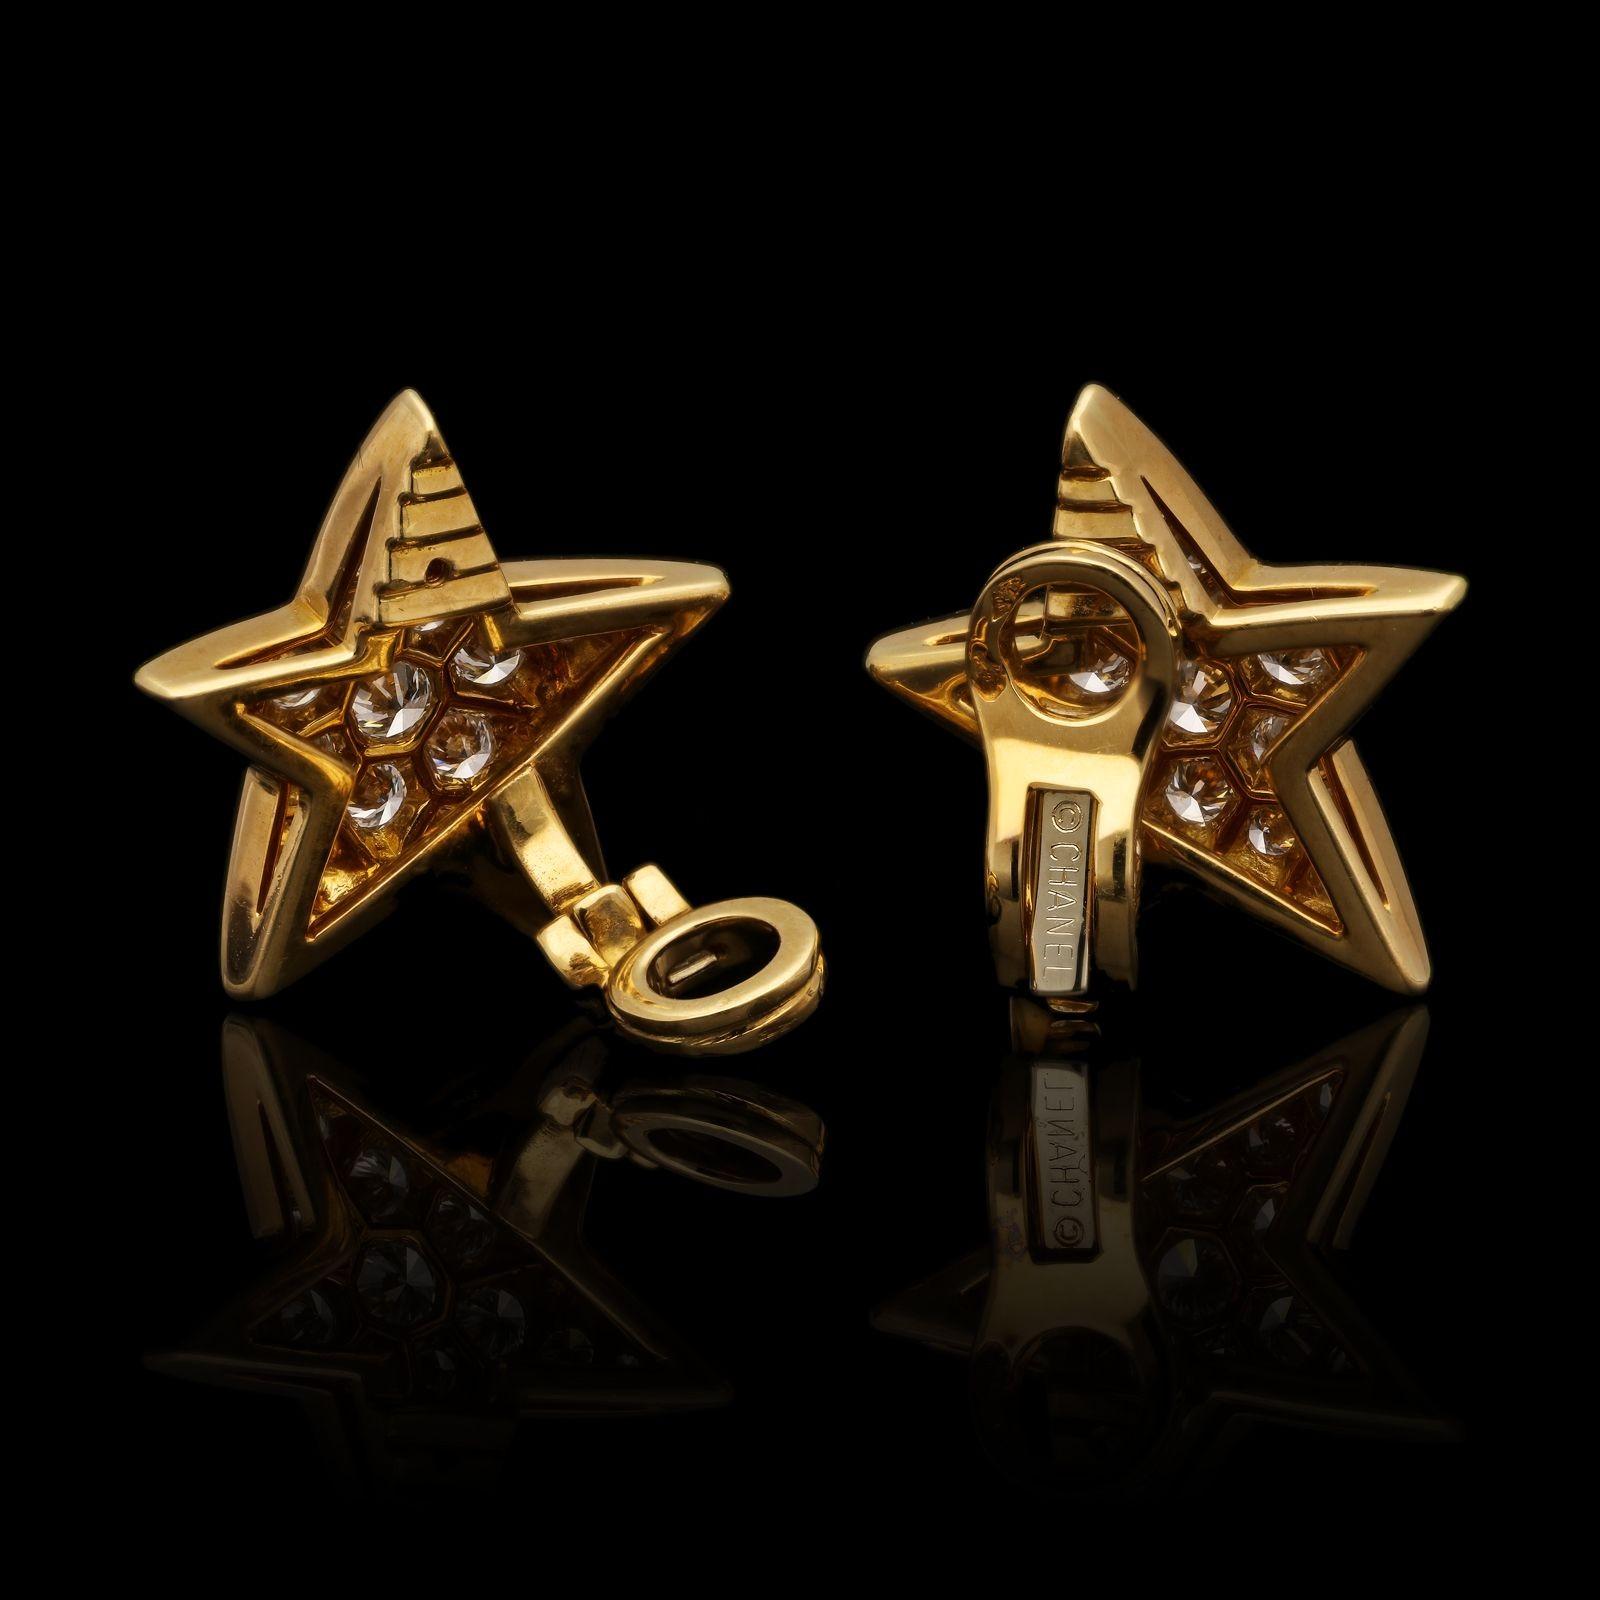 A lovely pair of gold and diamond star earrings by Chanel c.2015 from the Comète Collection, each designed as an asymmetric five pointed star in 18ct yellow gold with a gently domed profile and pavé set throughout with round brilliant cut diamonds